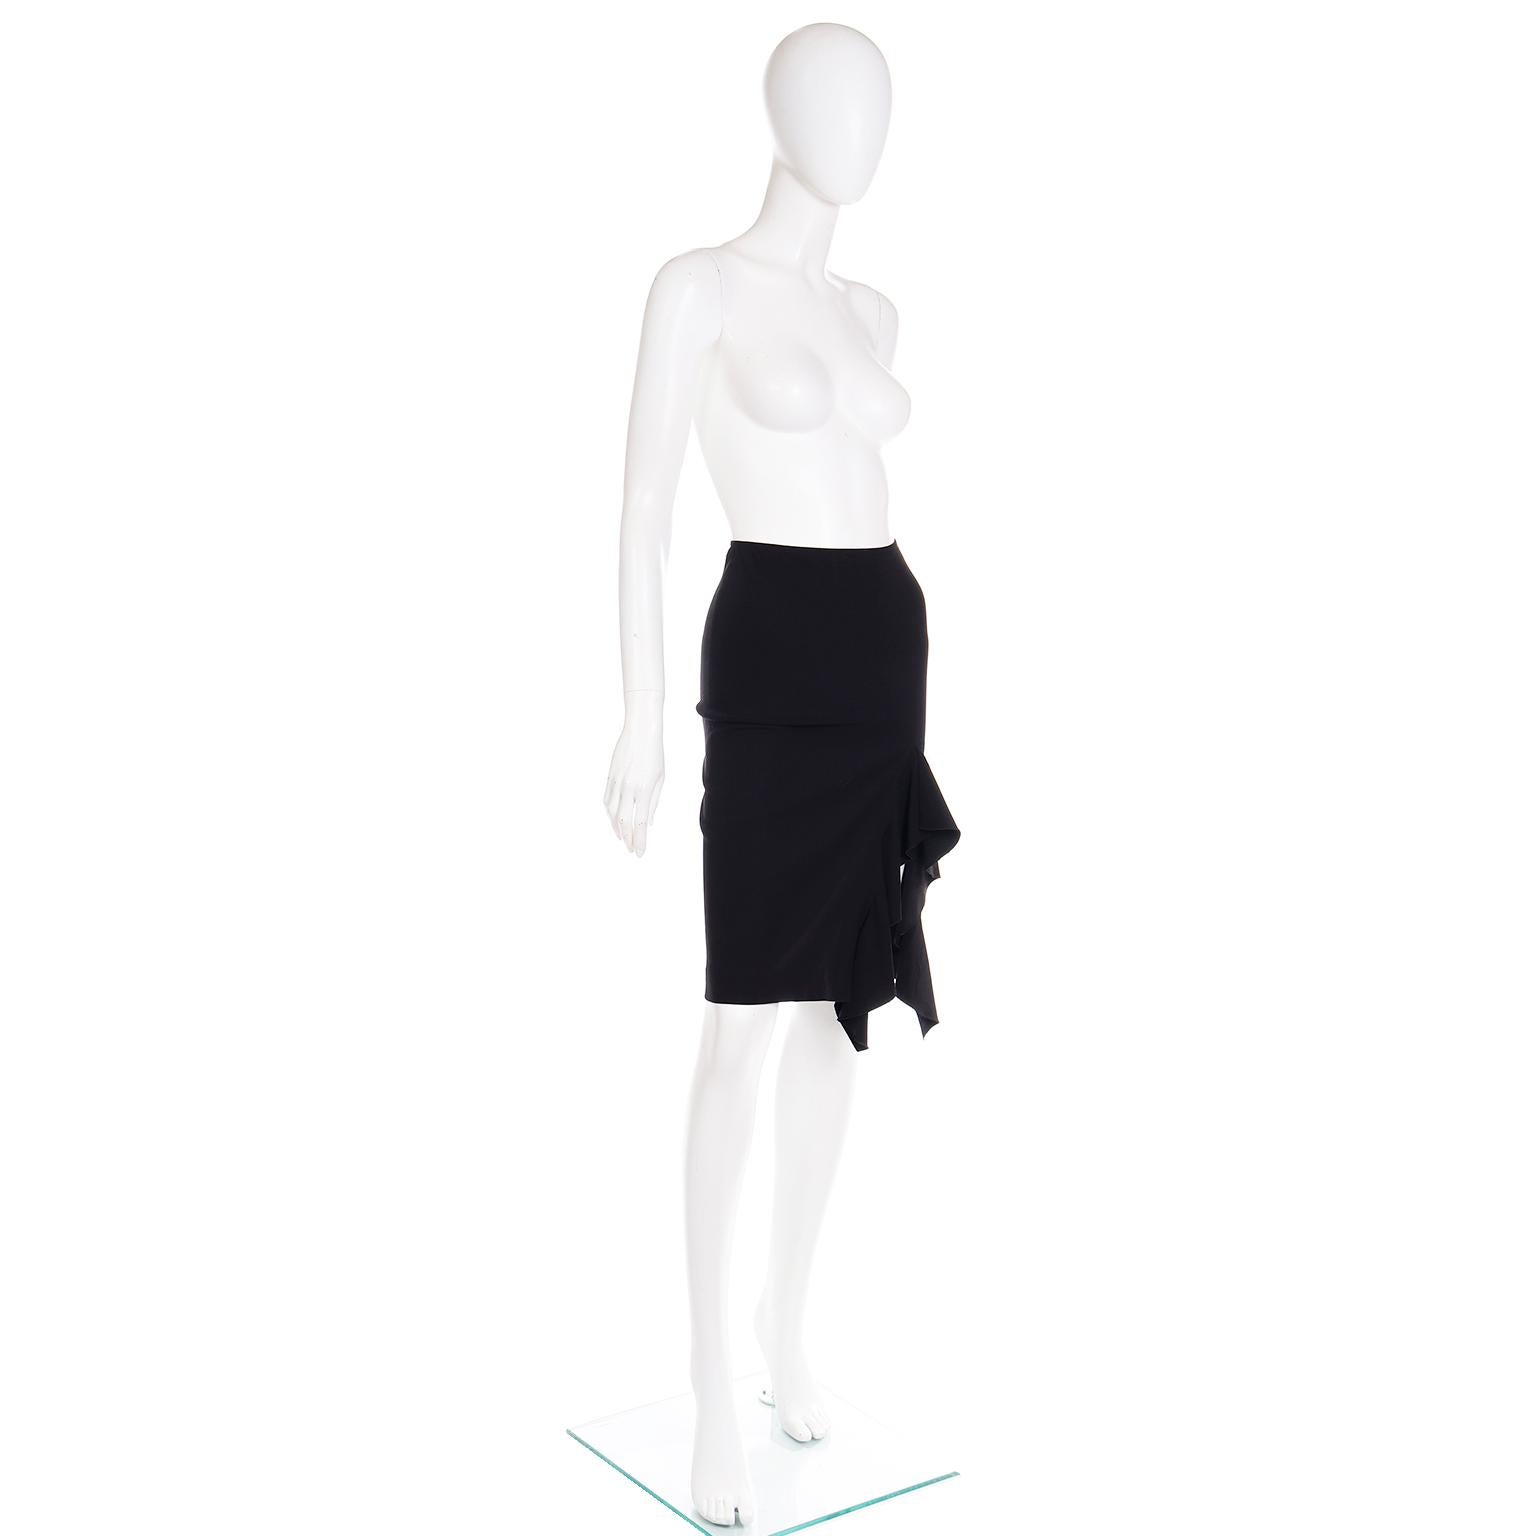 Jean Paul Gaultier Femme Vintage Black Bodycon Slim Skirt W Ruffled High Slit In Excellent Condition For Sale In Portland, OR